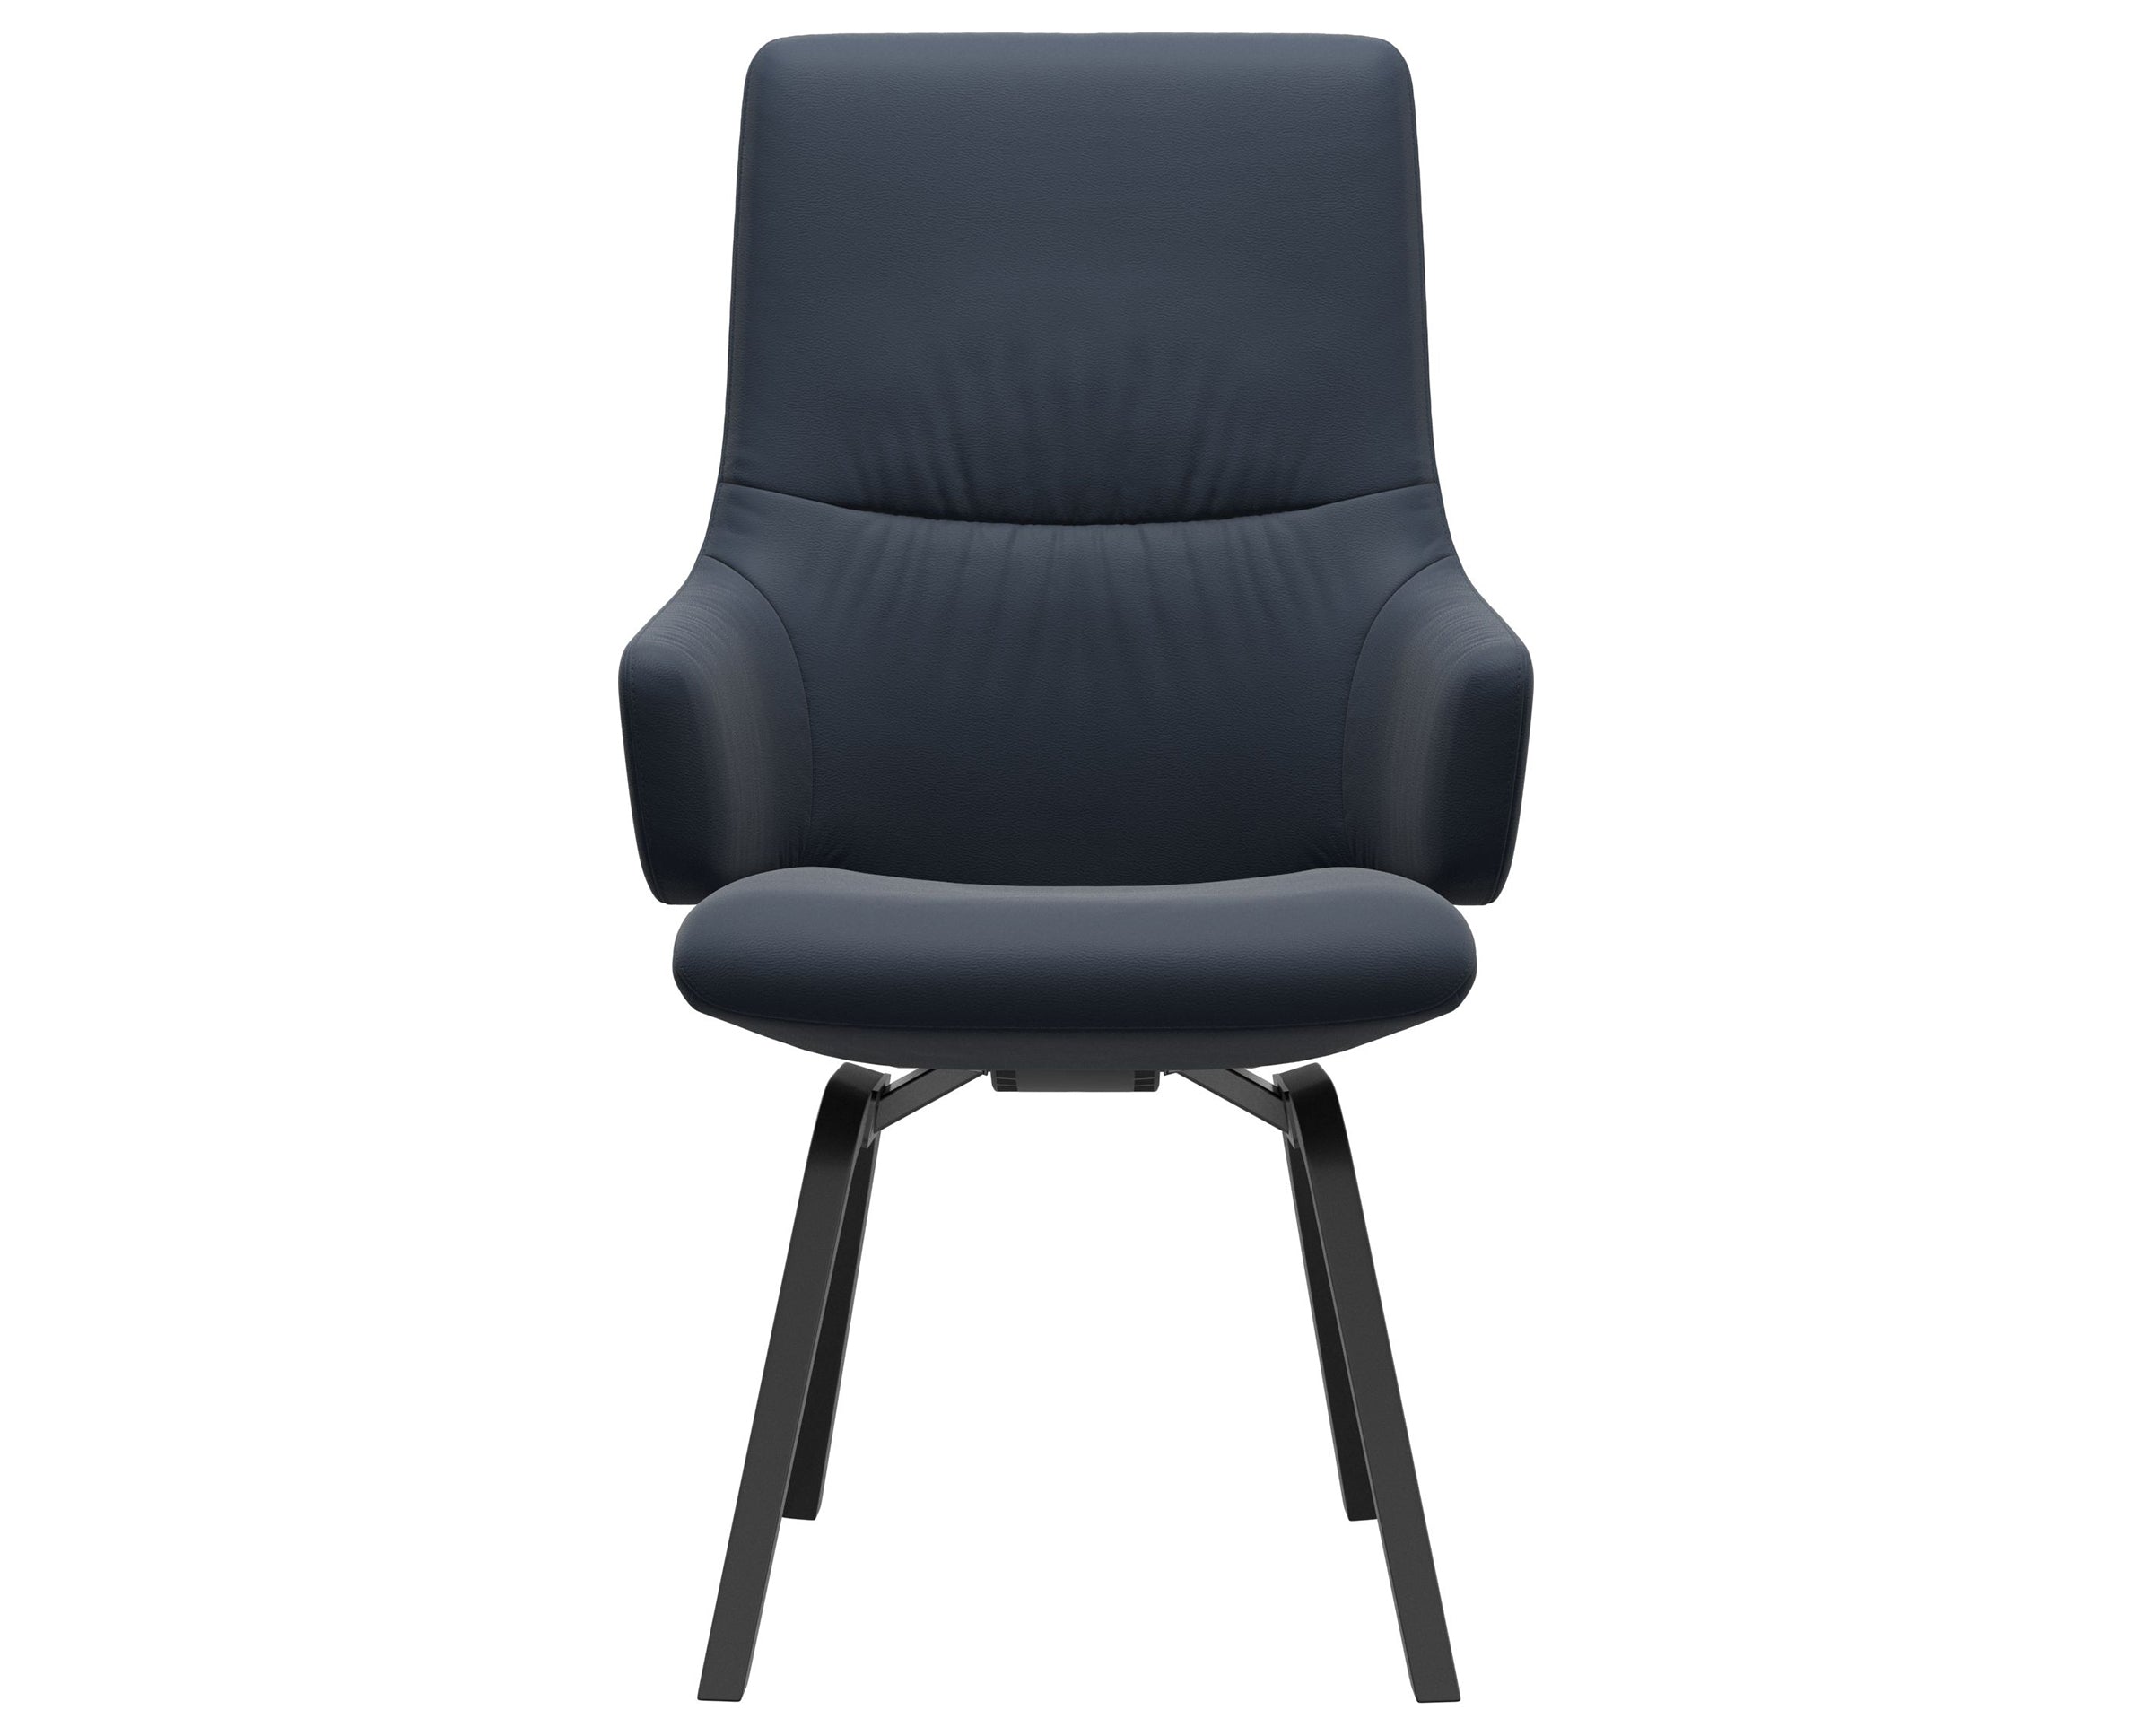 Paloma Leather Oxford Blue and Black Base | Stressless Mint High Back D200 Dining Chair w/Arms | Valley Ridge Furniture